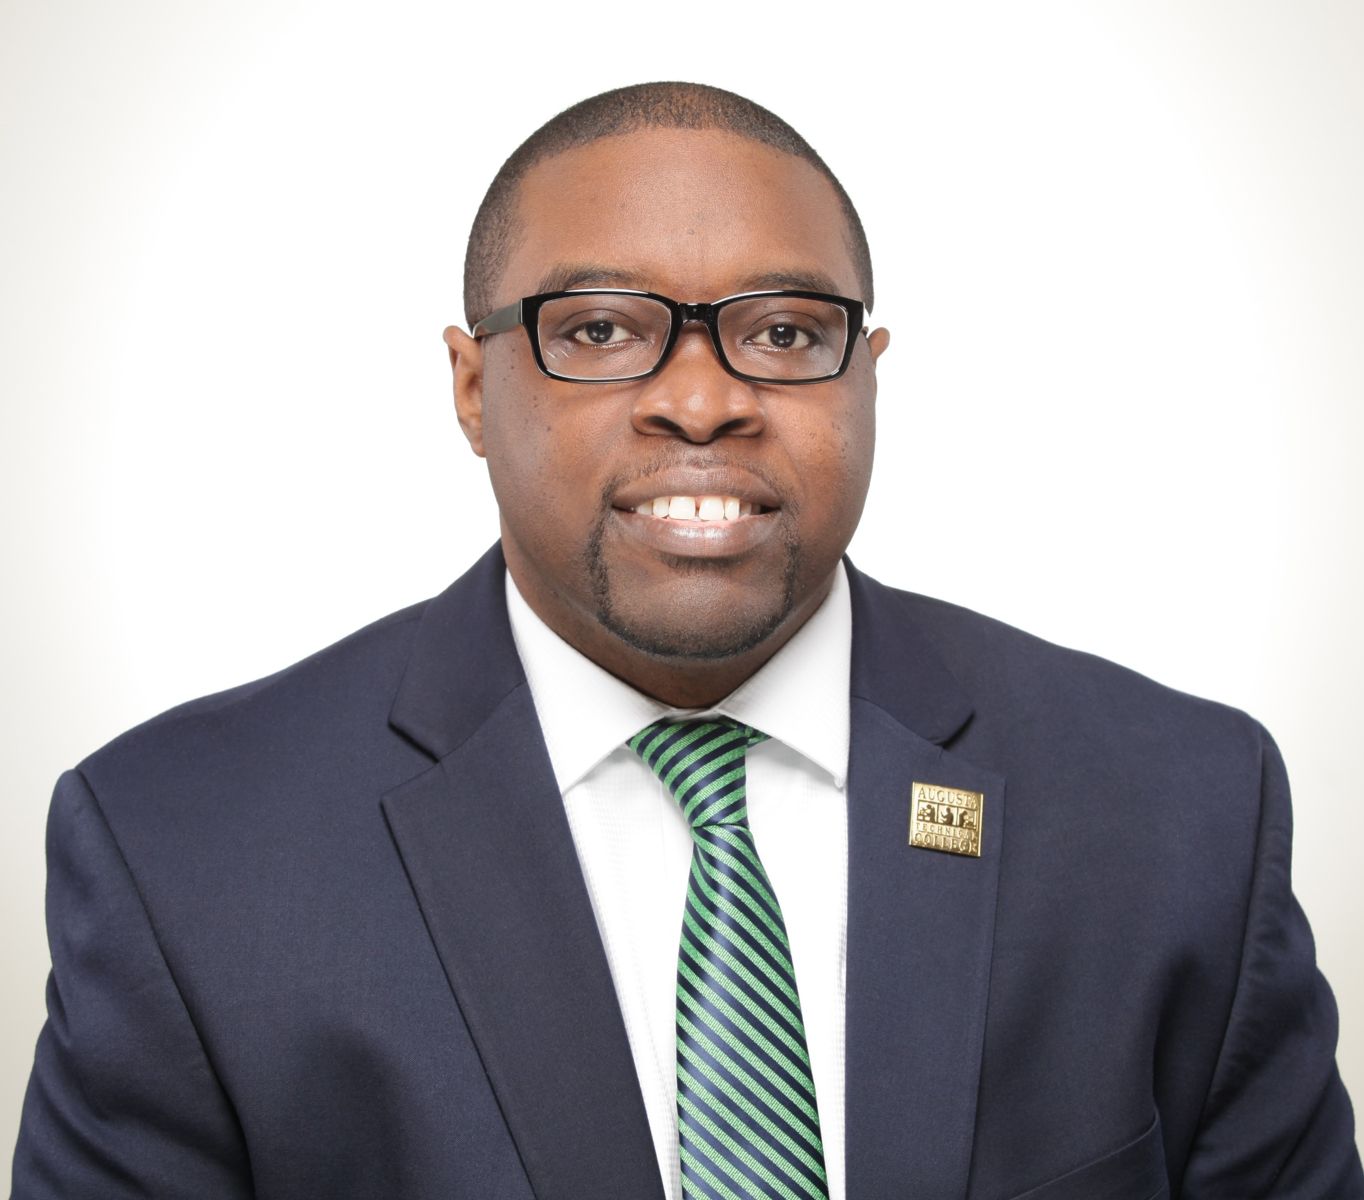 Smiling, African American male wearing black glasses wearing a blue suit, white collared shirt, green tie with blue stripes, and gold Augusta Technical College lapel pin.